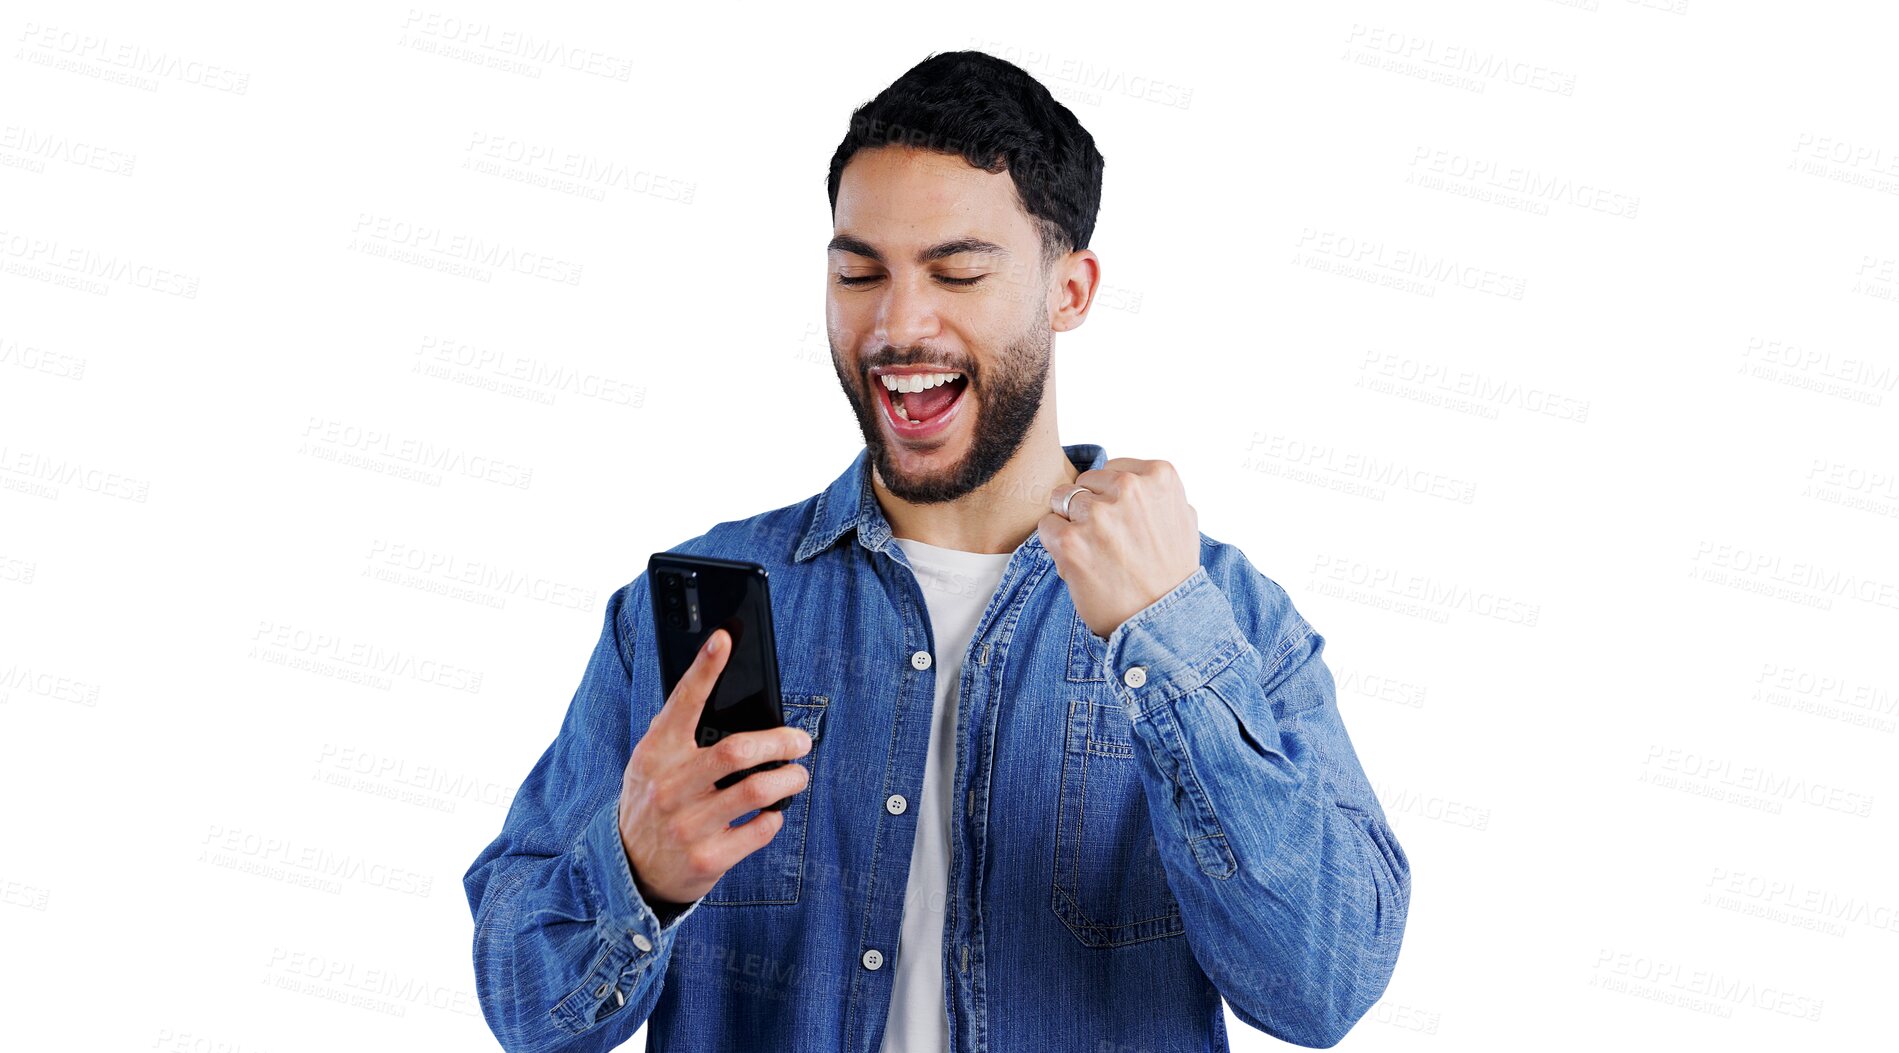 Buy stock photo Phone, wow and excited man with winner fist for gaming success on isolated, transparent or png background. Yes, hands and happy person with smartphone app for prize, reward or competition giveaway